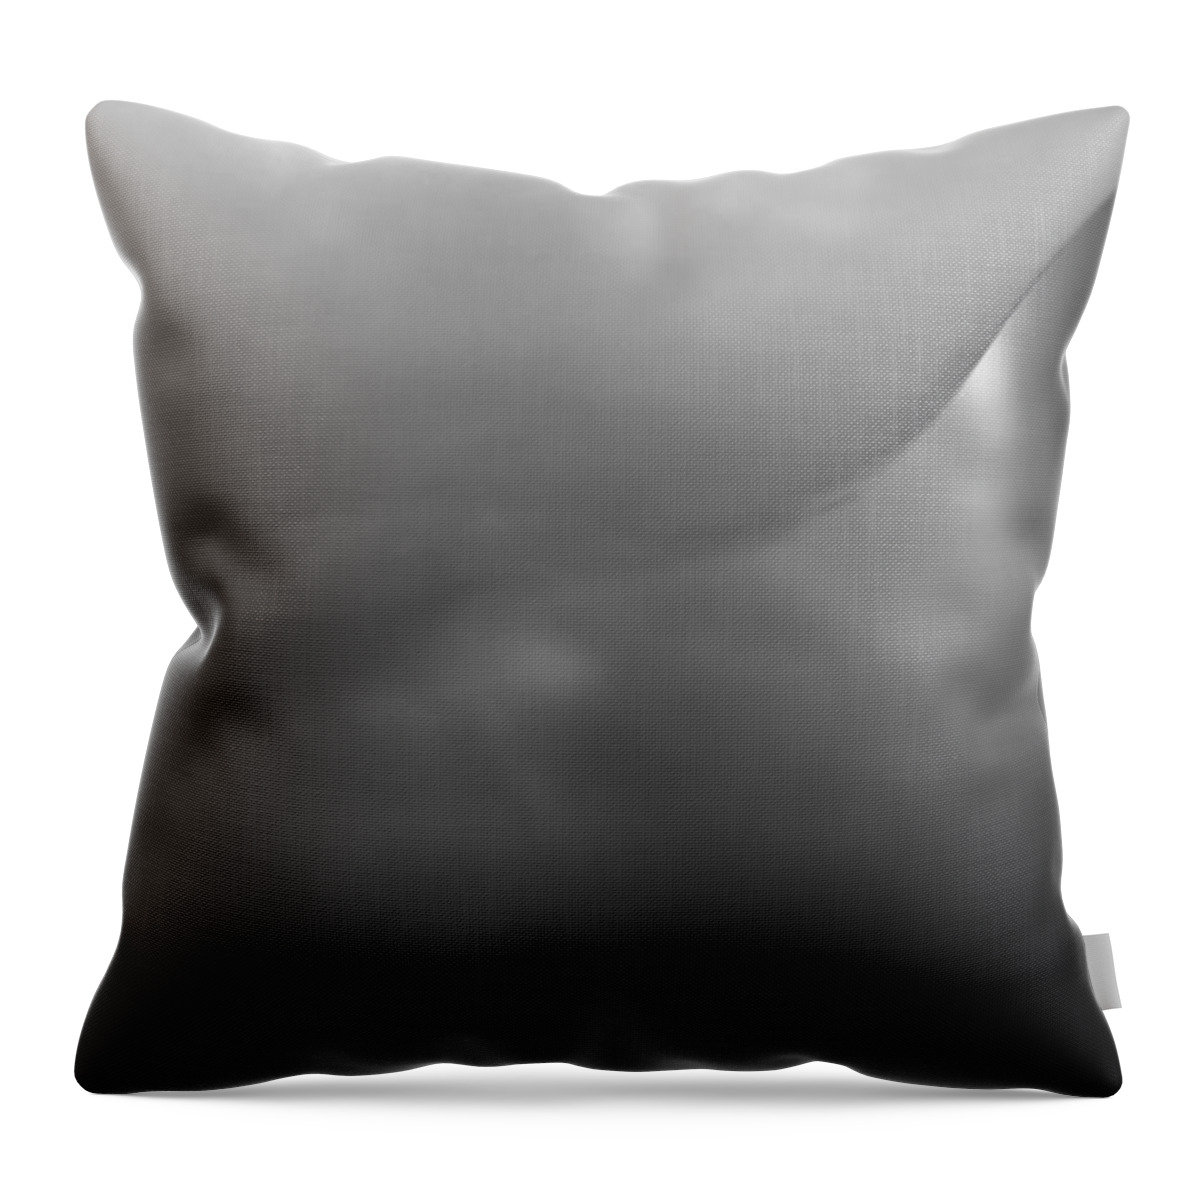 Abstract Throw Pillow featuring the photograph Abstract Study Black And White by Catherine Lau